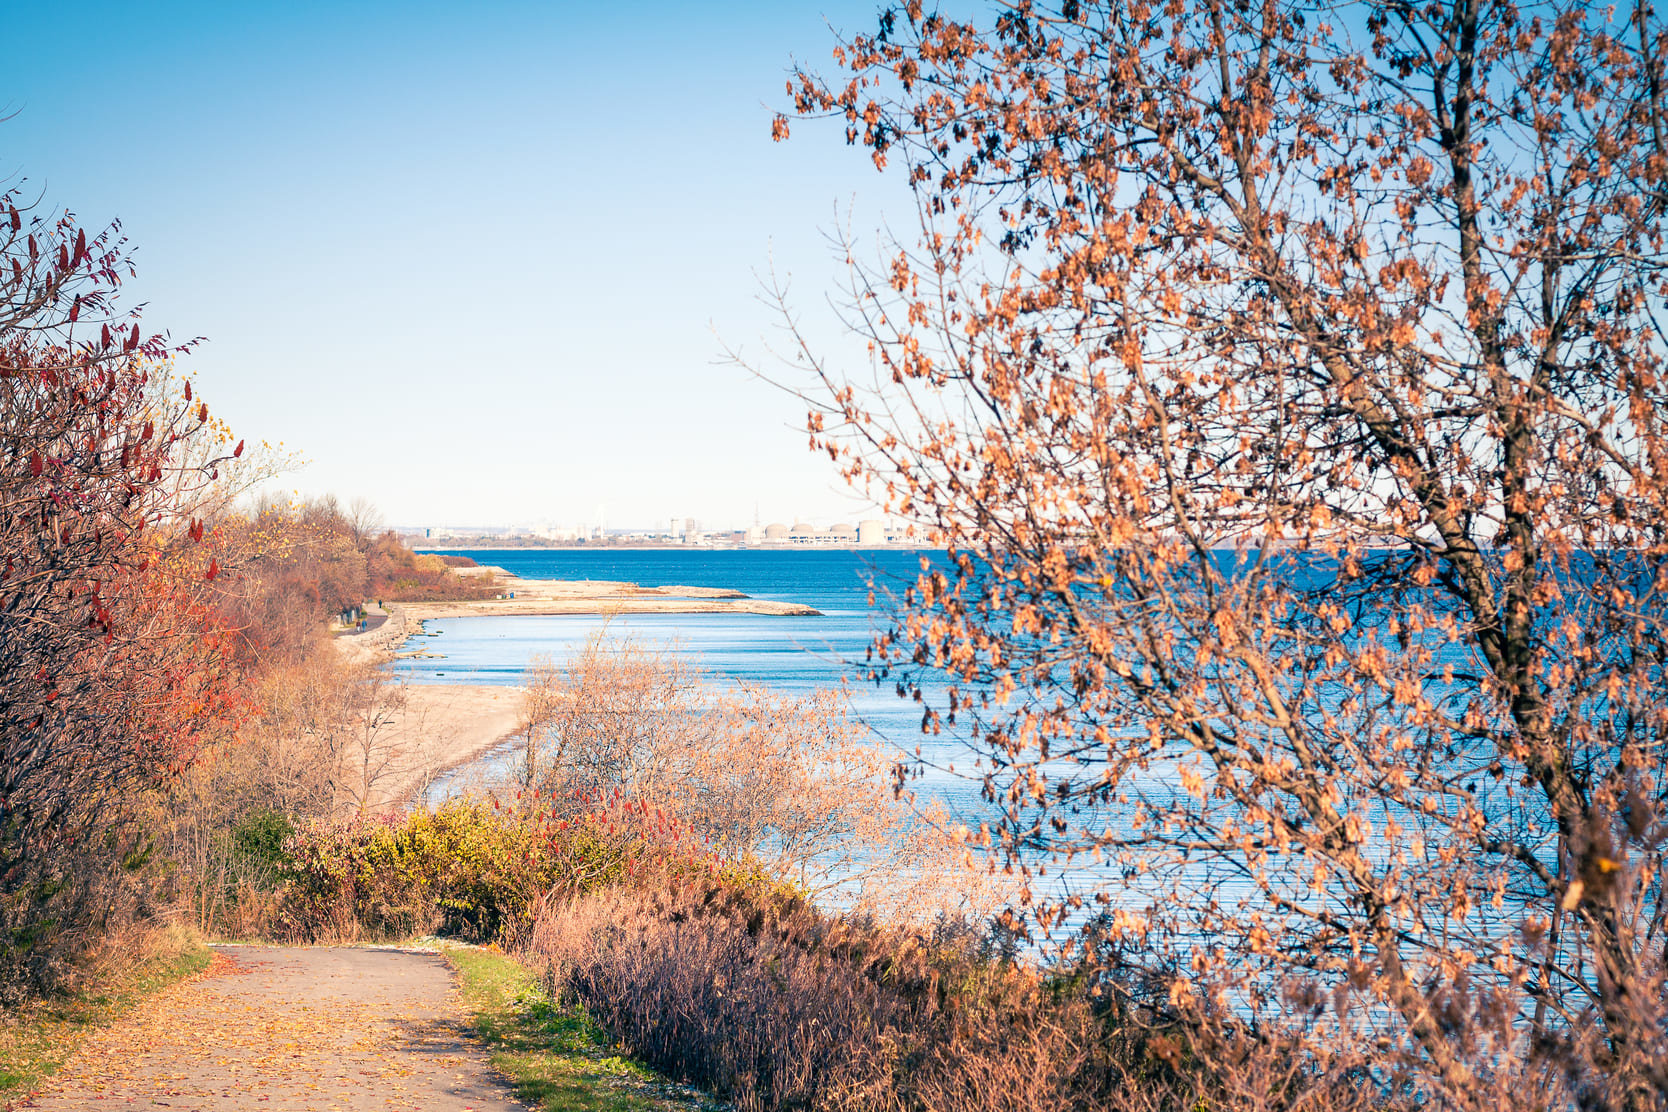 View of Lake Ontario from Port Union Waterfront Park in Scarborough, Ontario